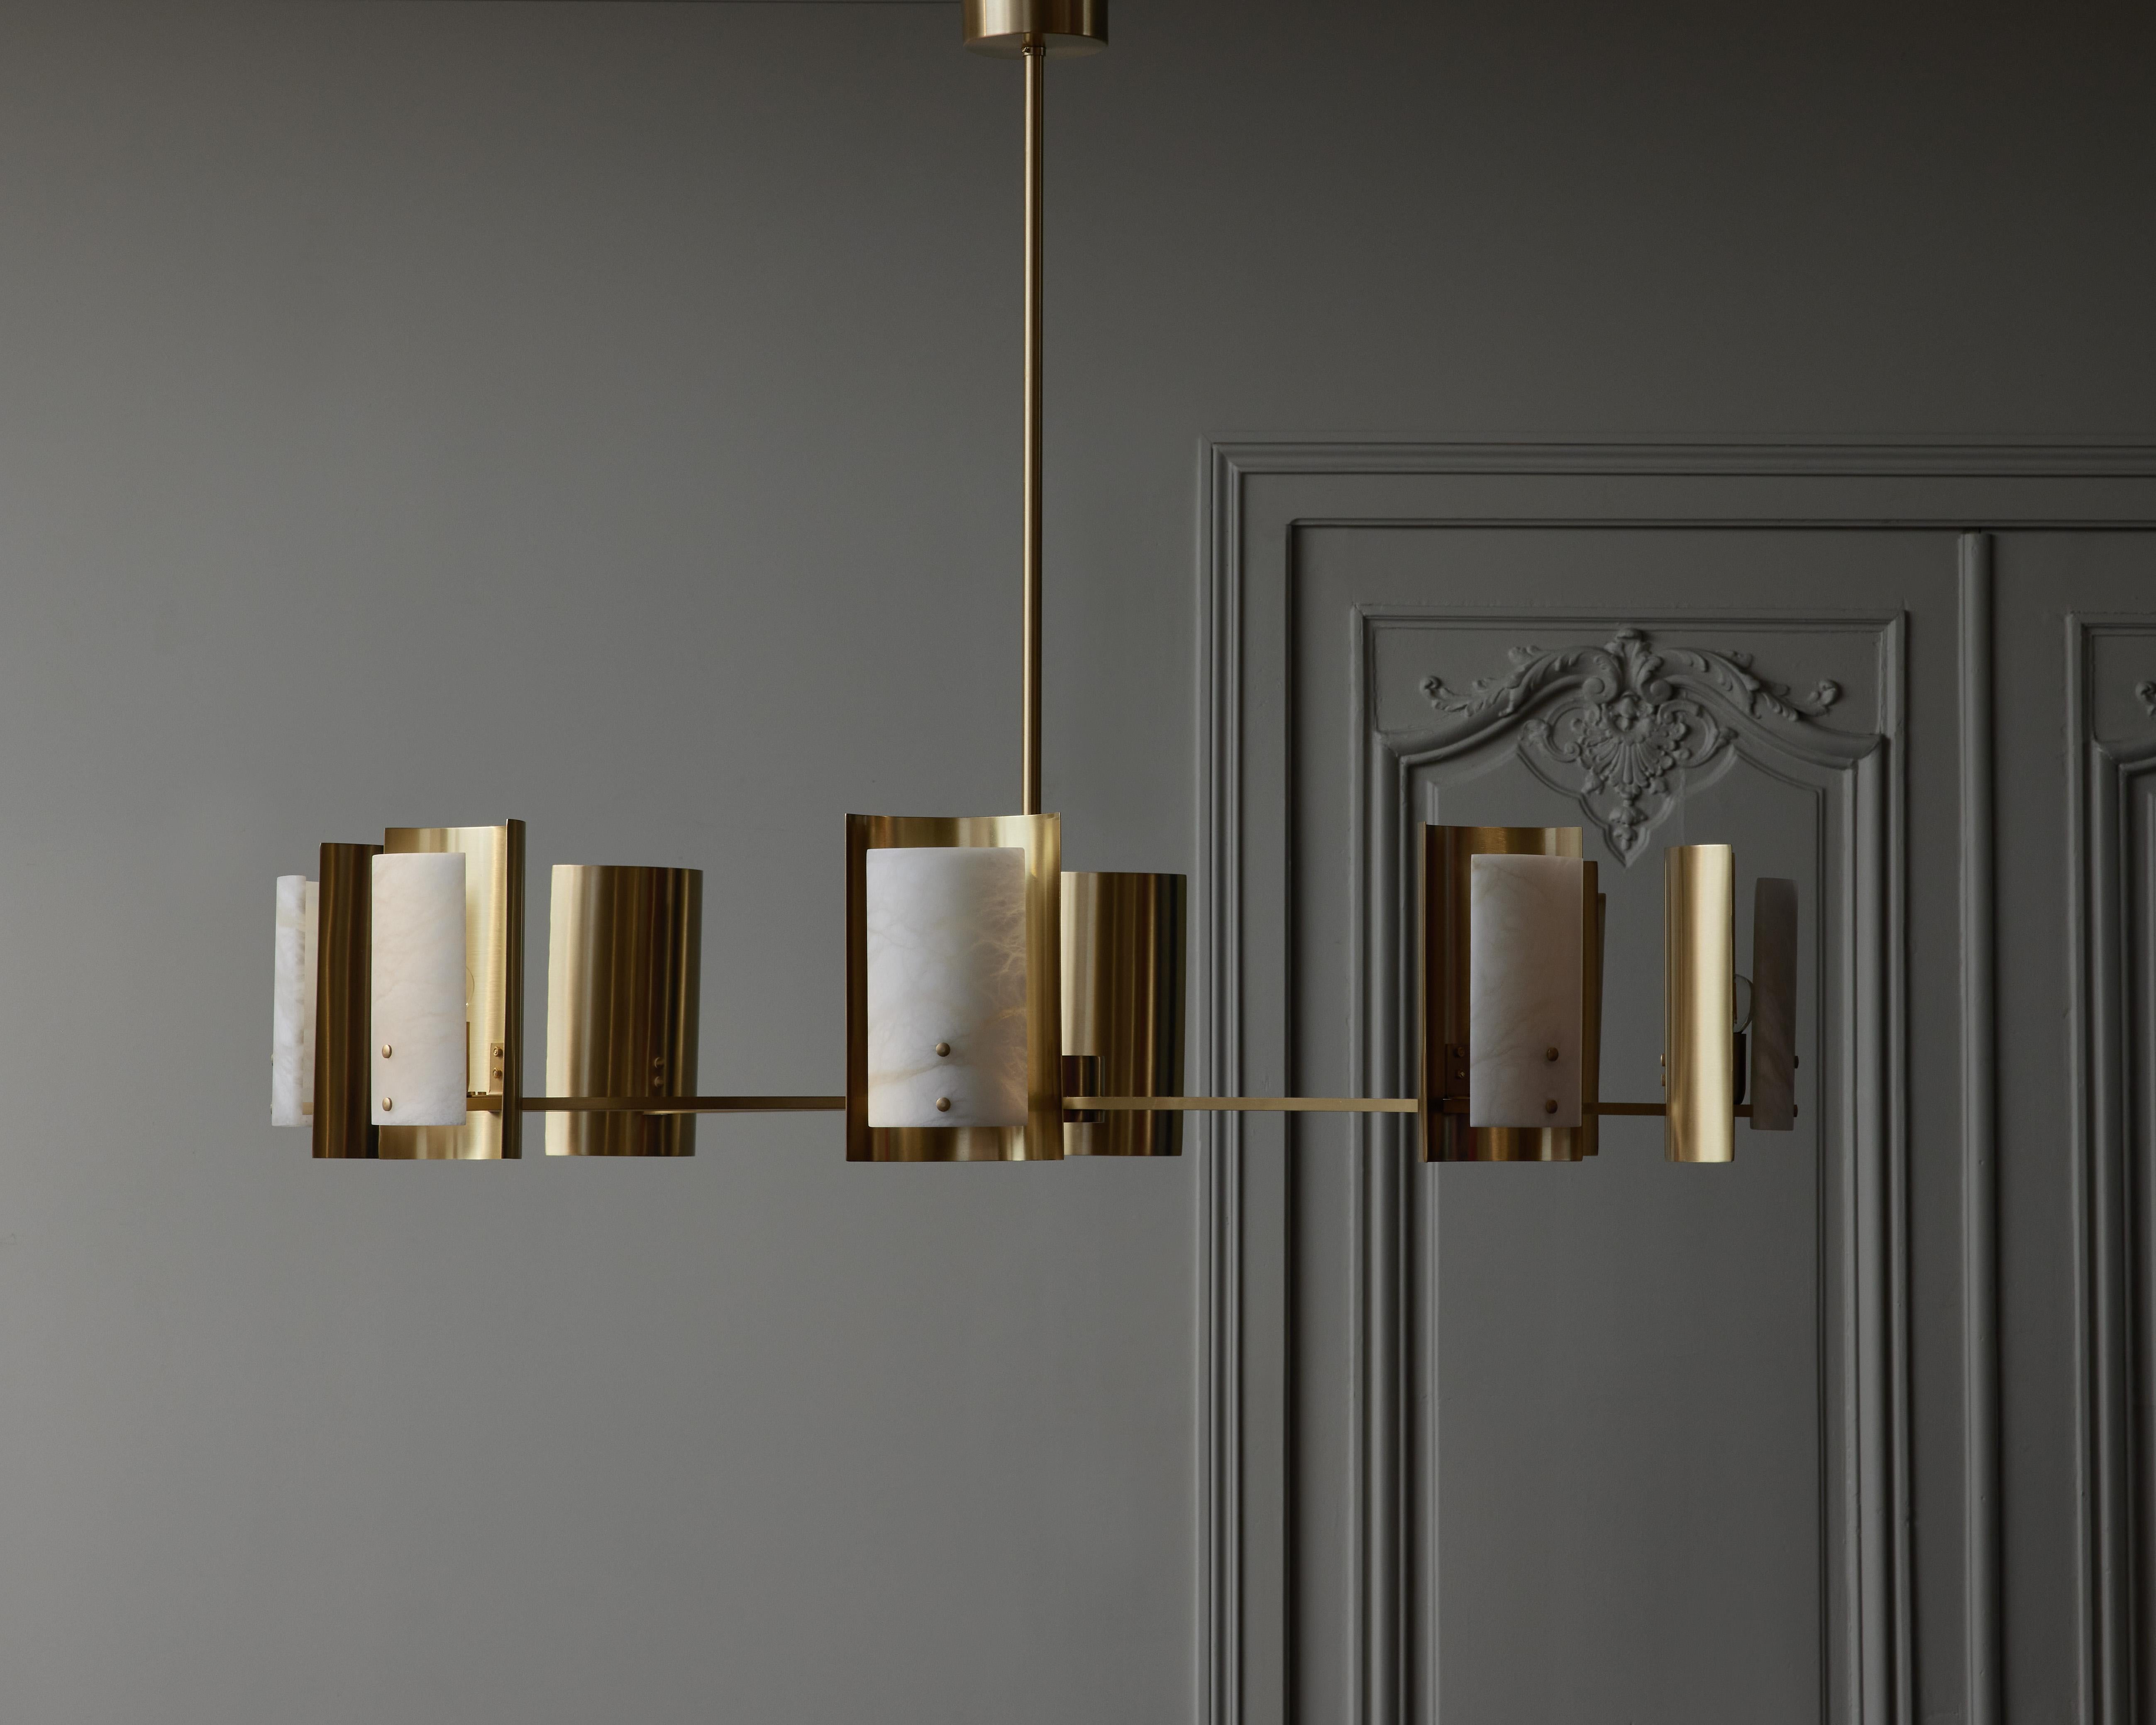 Round chandelier designed by Glustin Luminaires, made of a central vertical stem, eight arms of light each holding a concave satin brass reflector and a convex alabaster diffuser for the source of light.